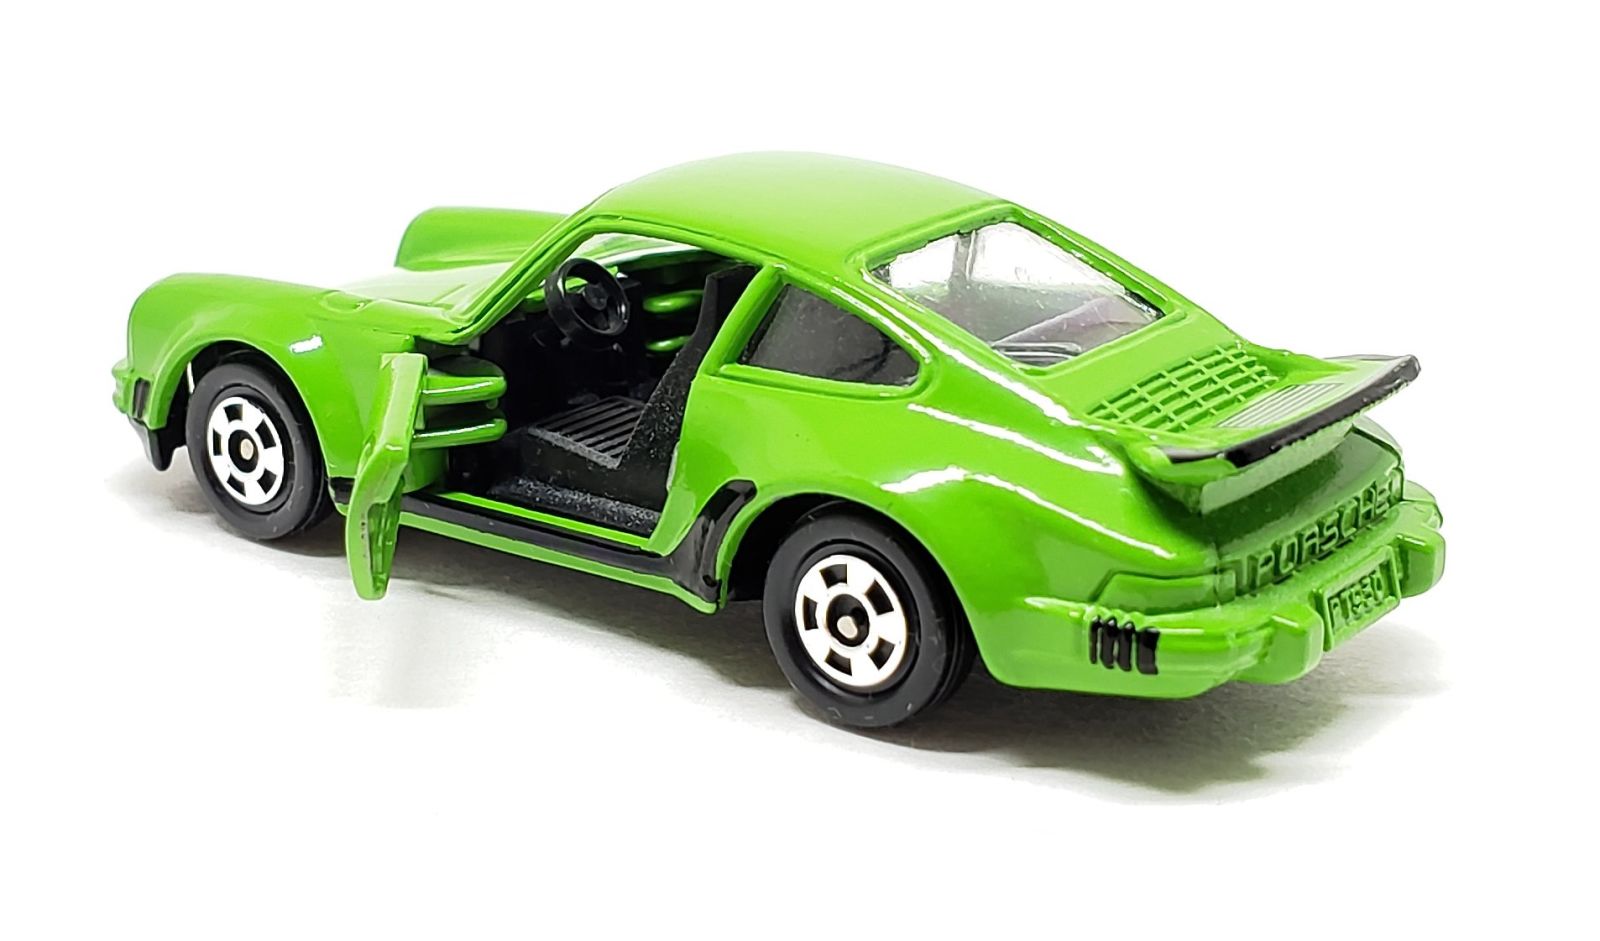 Illustration for article titled [REVIEW] Tomica Porsche 930 Turbo